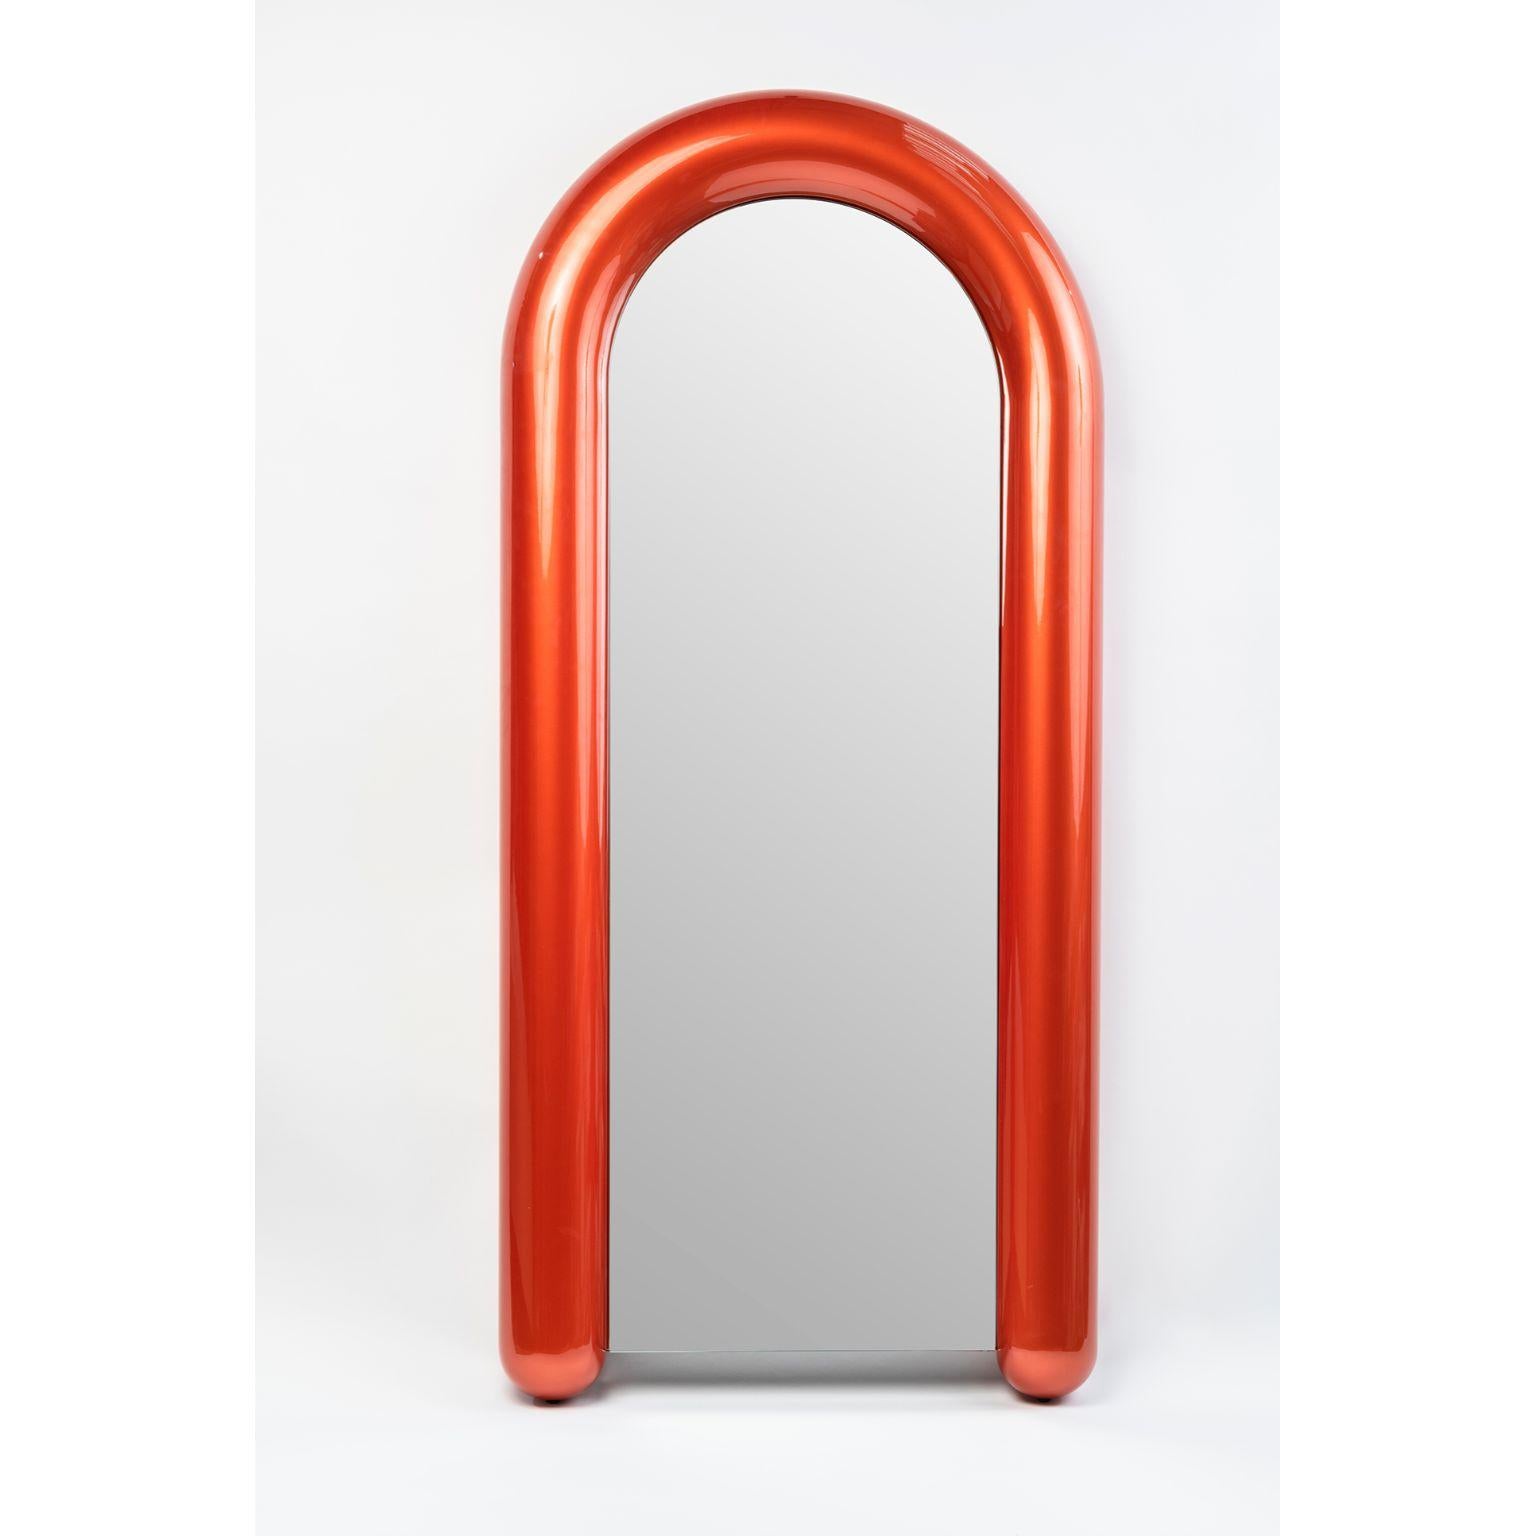 Soufflé mirror by Luca Nichetto.
Materials: structure: menthol / coral / prune 
liquid-painted metal, mirror.
Dimensions: W 91.5 x D 16 x H 200.5 cm.

  

With a playful design and an inflated appearance, Soufflé mirror borrows the French